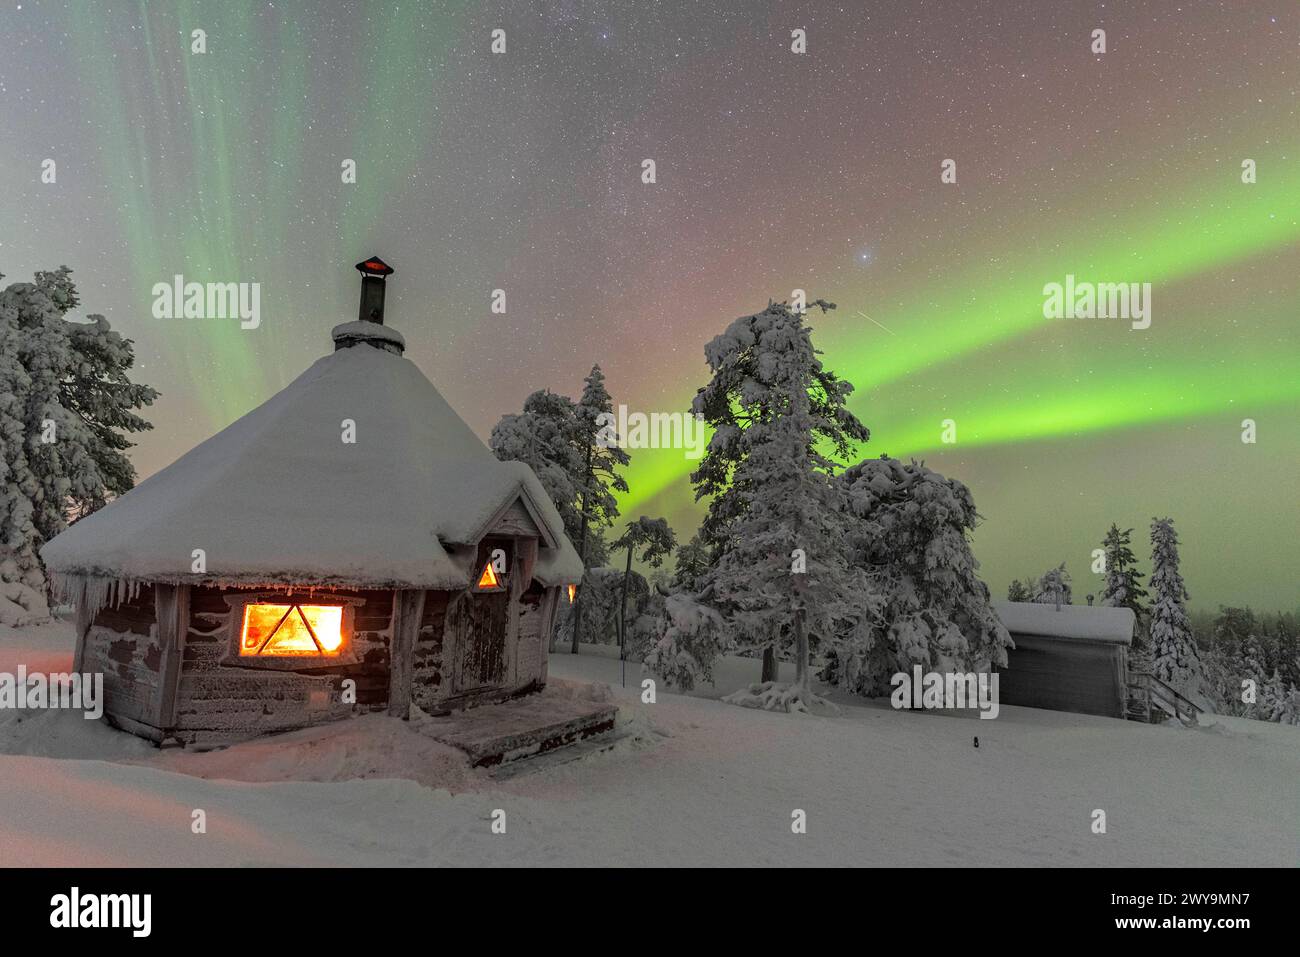 Shades of green color the Northern Lights Aurora Borealis above a snowy landscape with a typical hut lit by a fire inside in the foreground, Finnish L Stock Photo